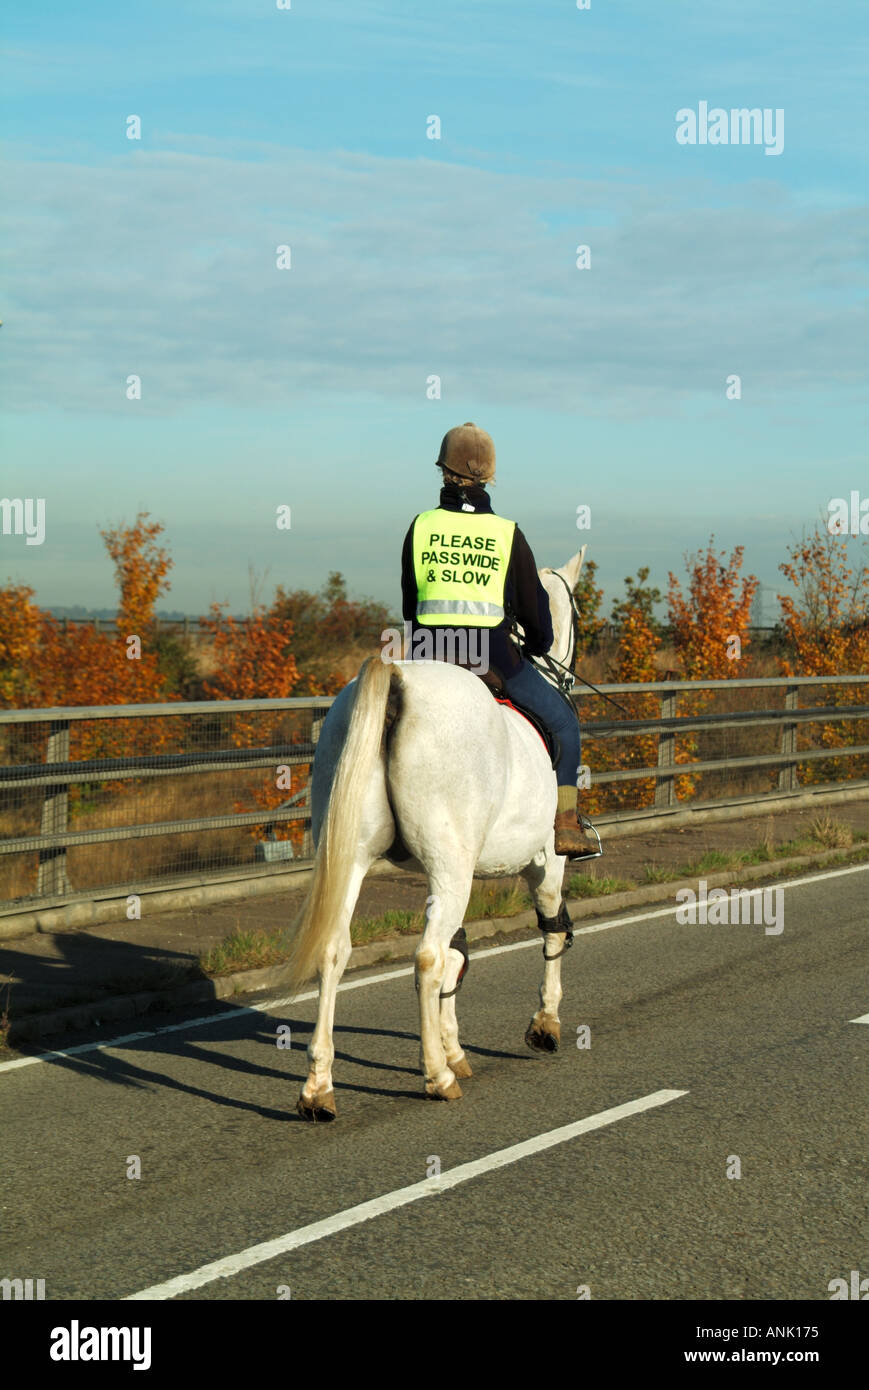 High viz back view of woman horse rider on road bridge over motorway wearing high vis visibility safety vest message pass wide & slow Essex England UK Stock Photo